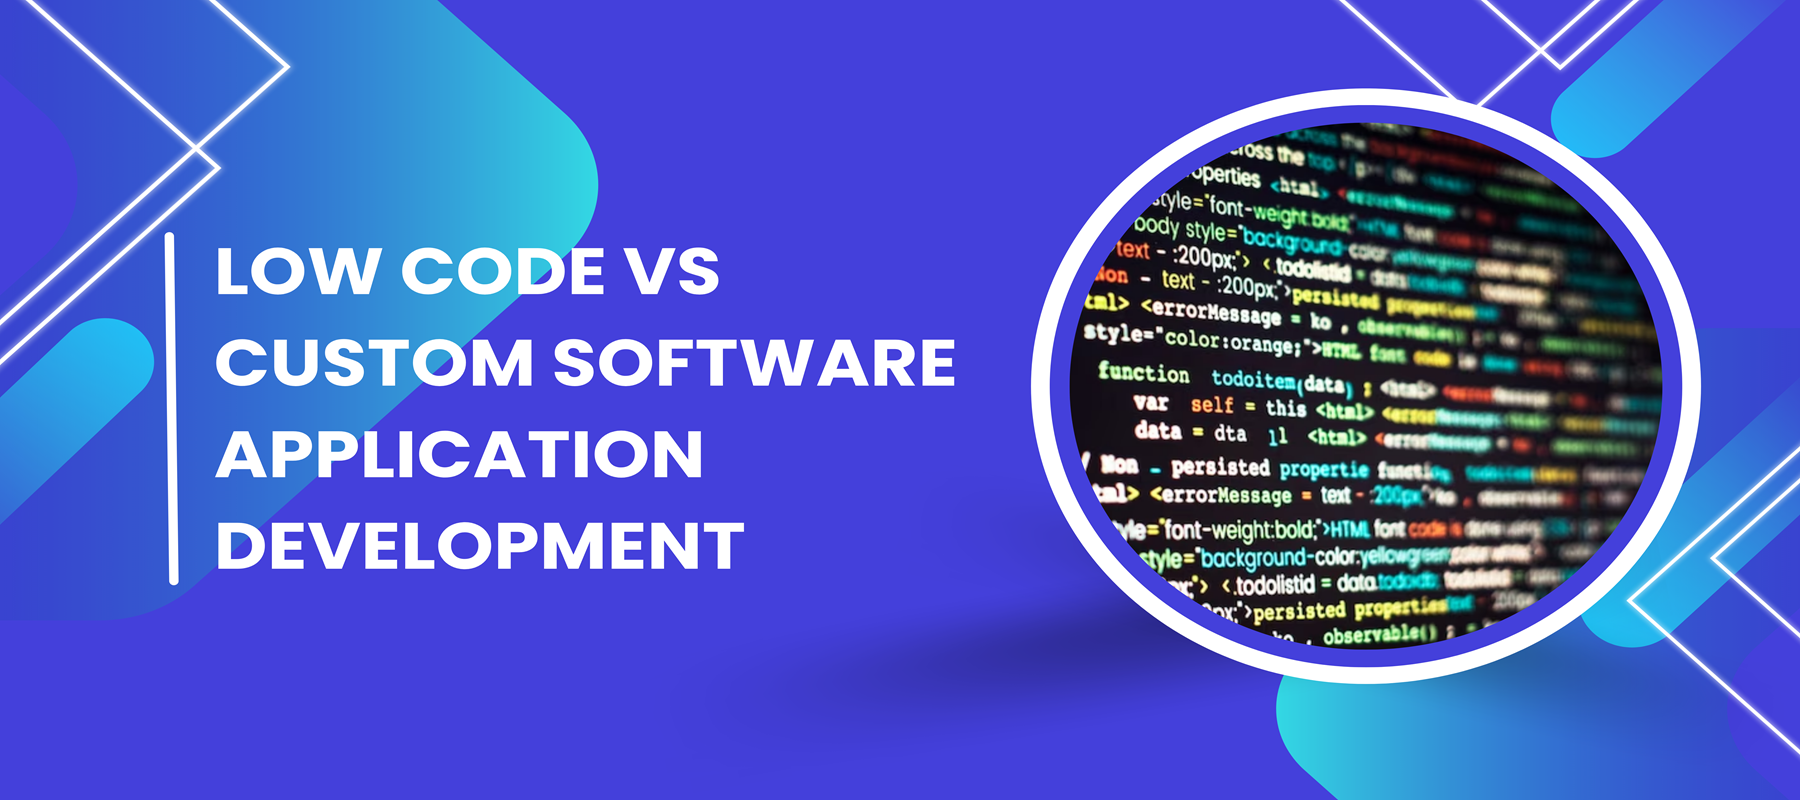 LOW CODE AND CUSTOM SOFTWARE APPLICATION DEVELOPMENT